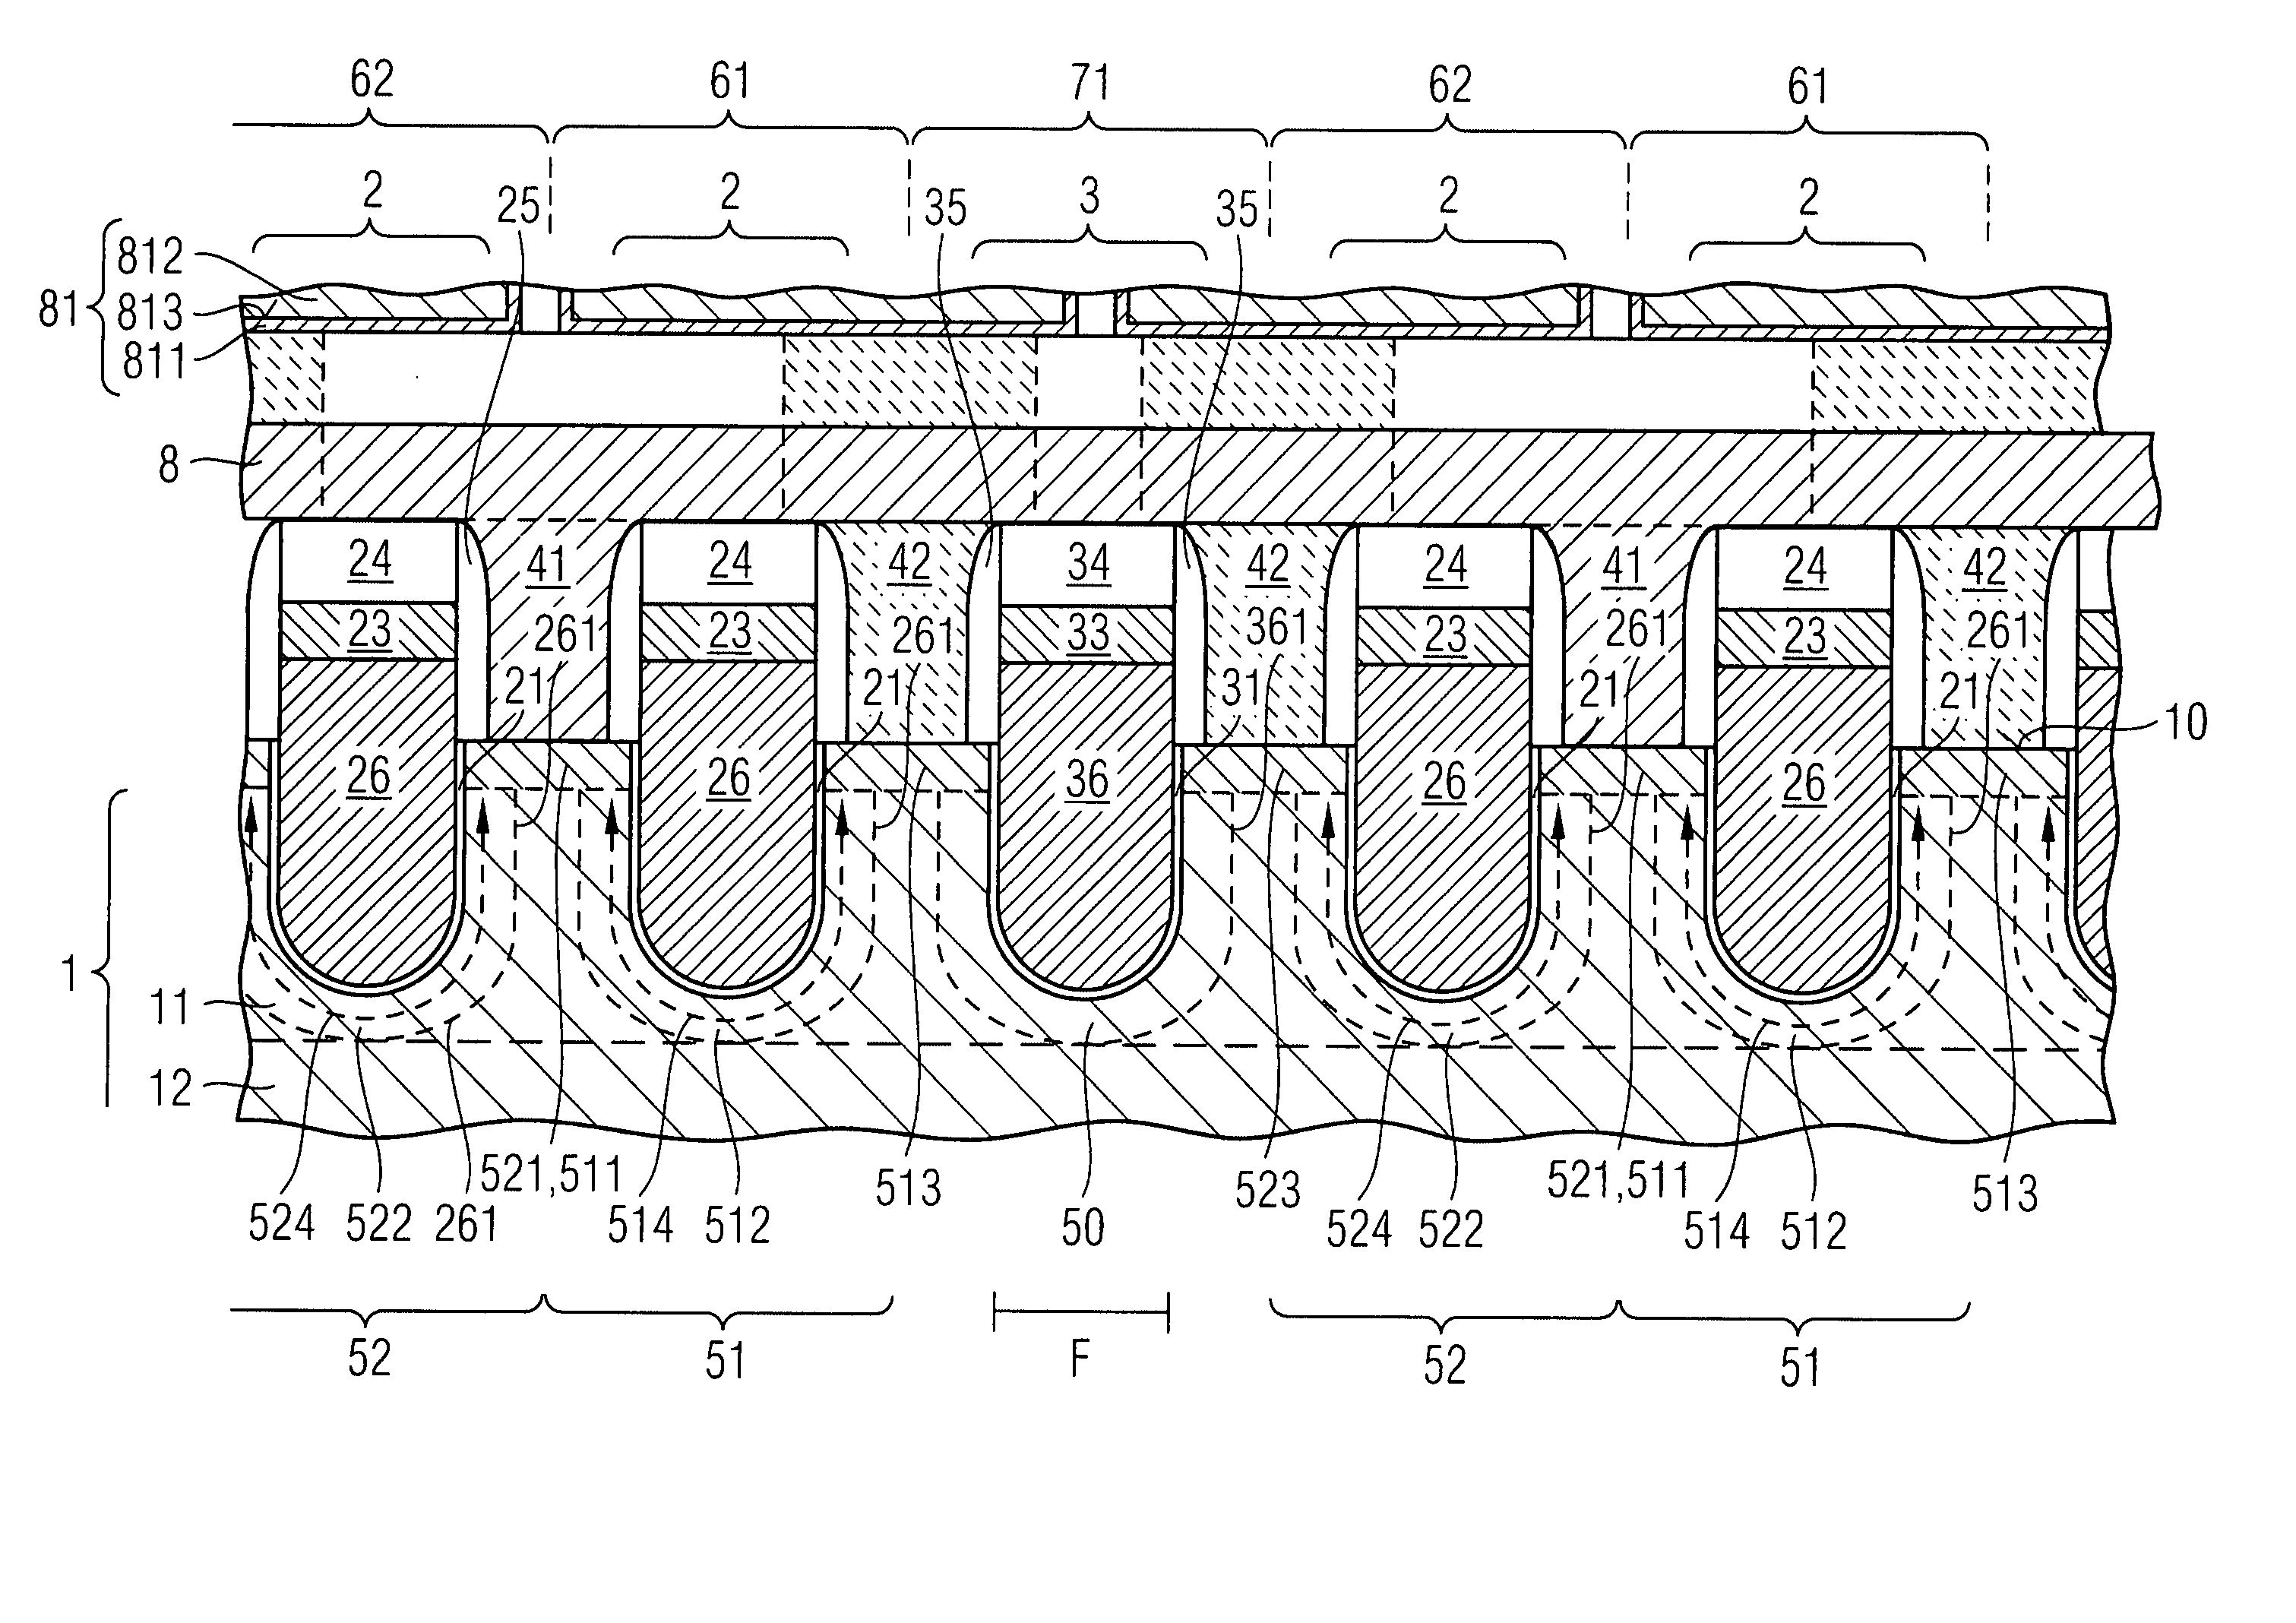 6F2 access transistor arrangement and semiconductor memory device